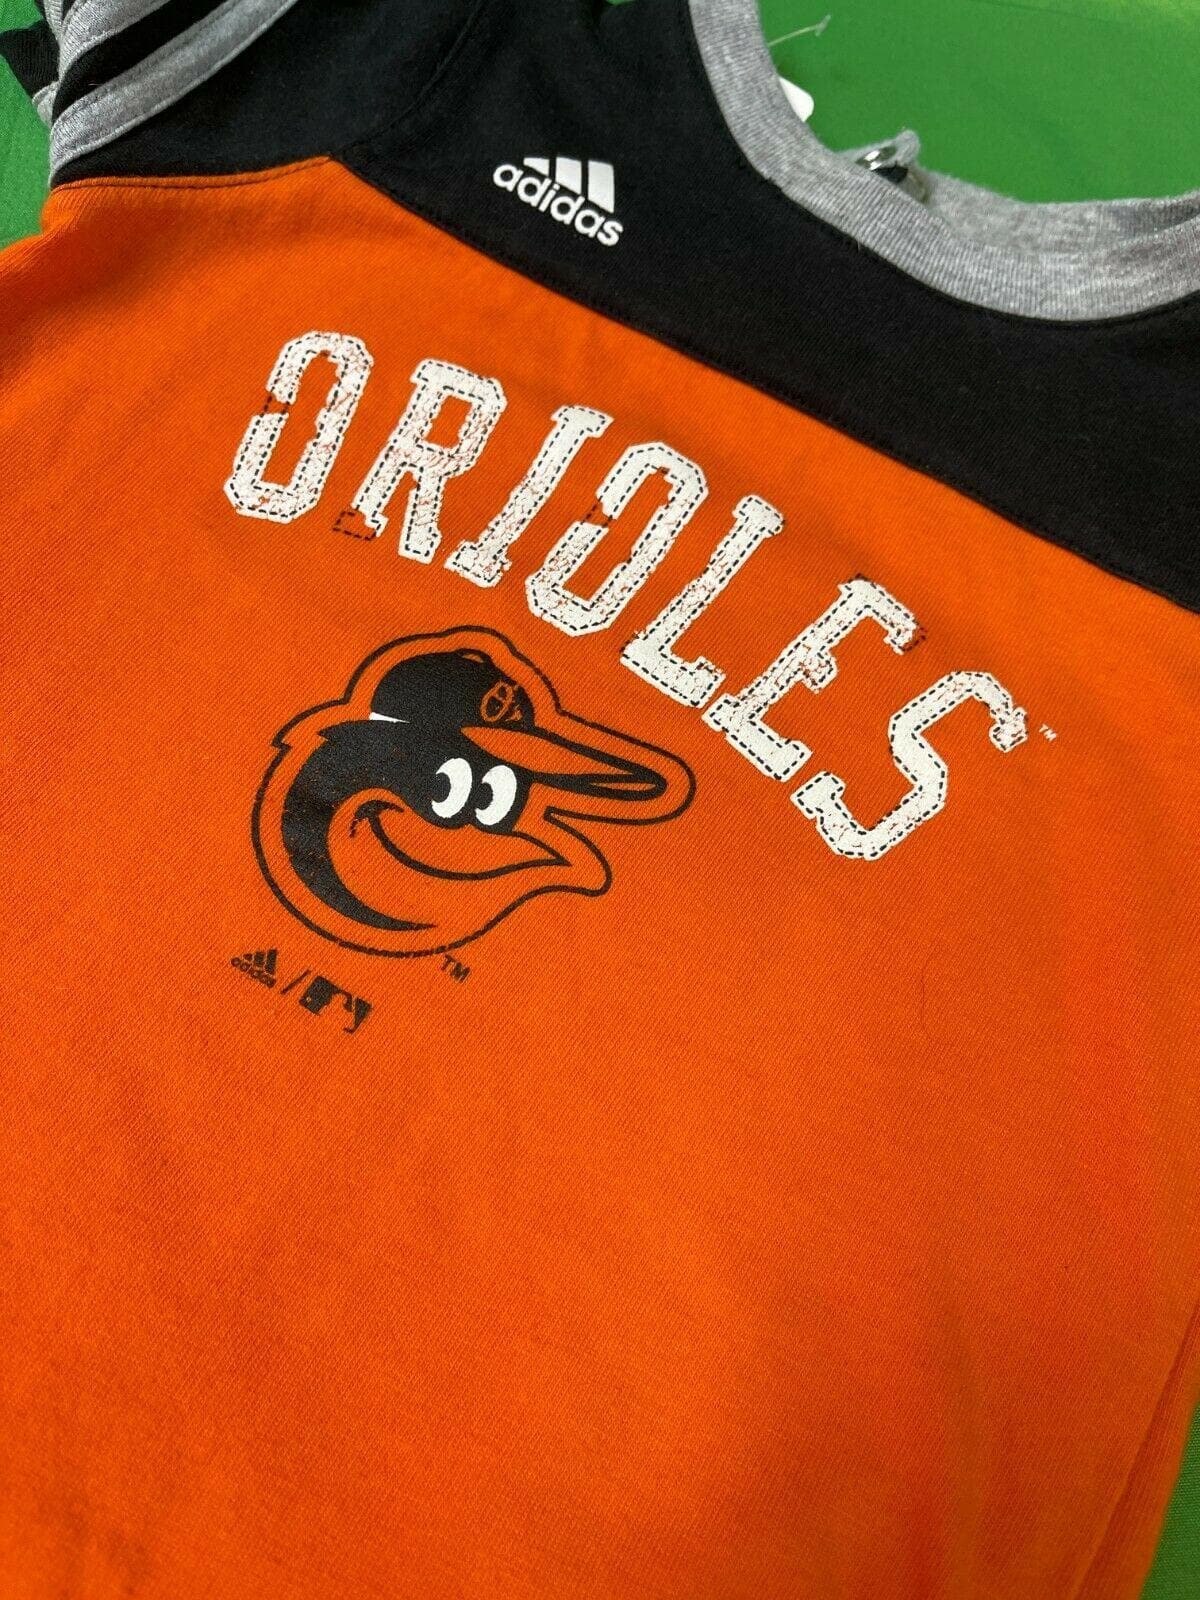 MLB Baltimore Orioles Adidas Play Outfit Toddler 24 months